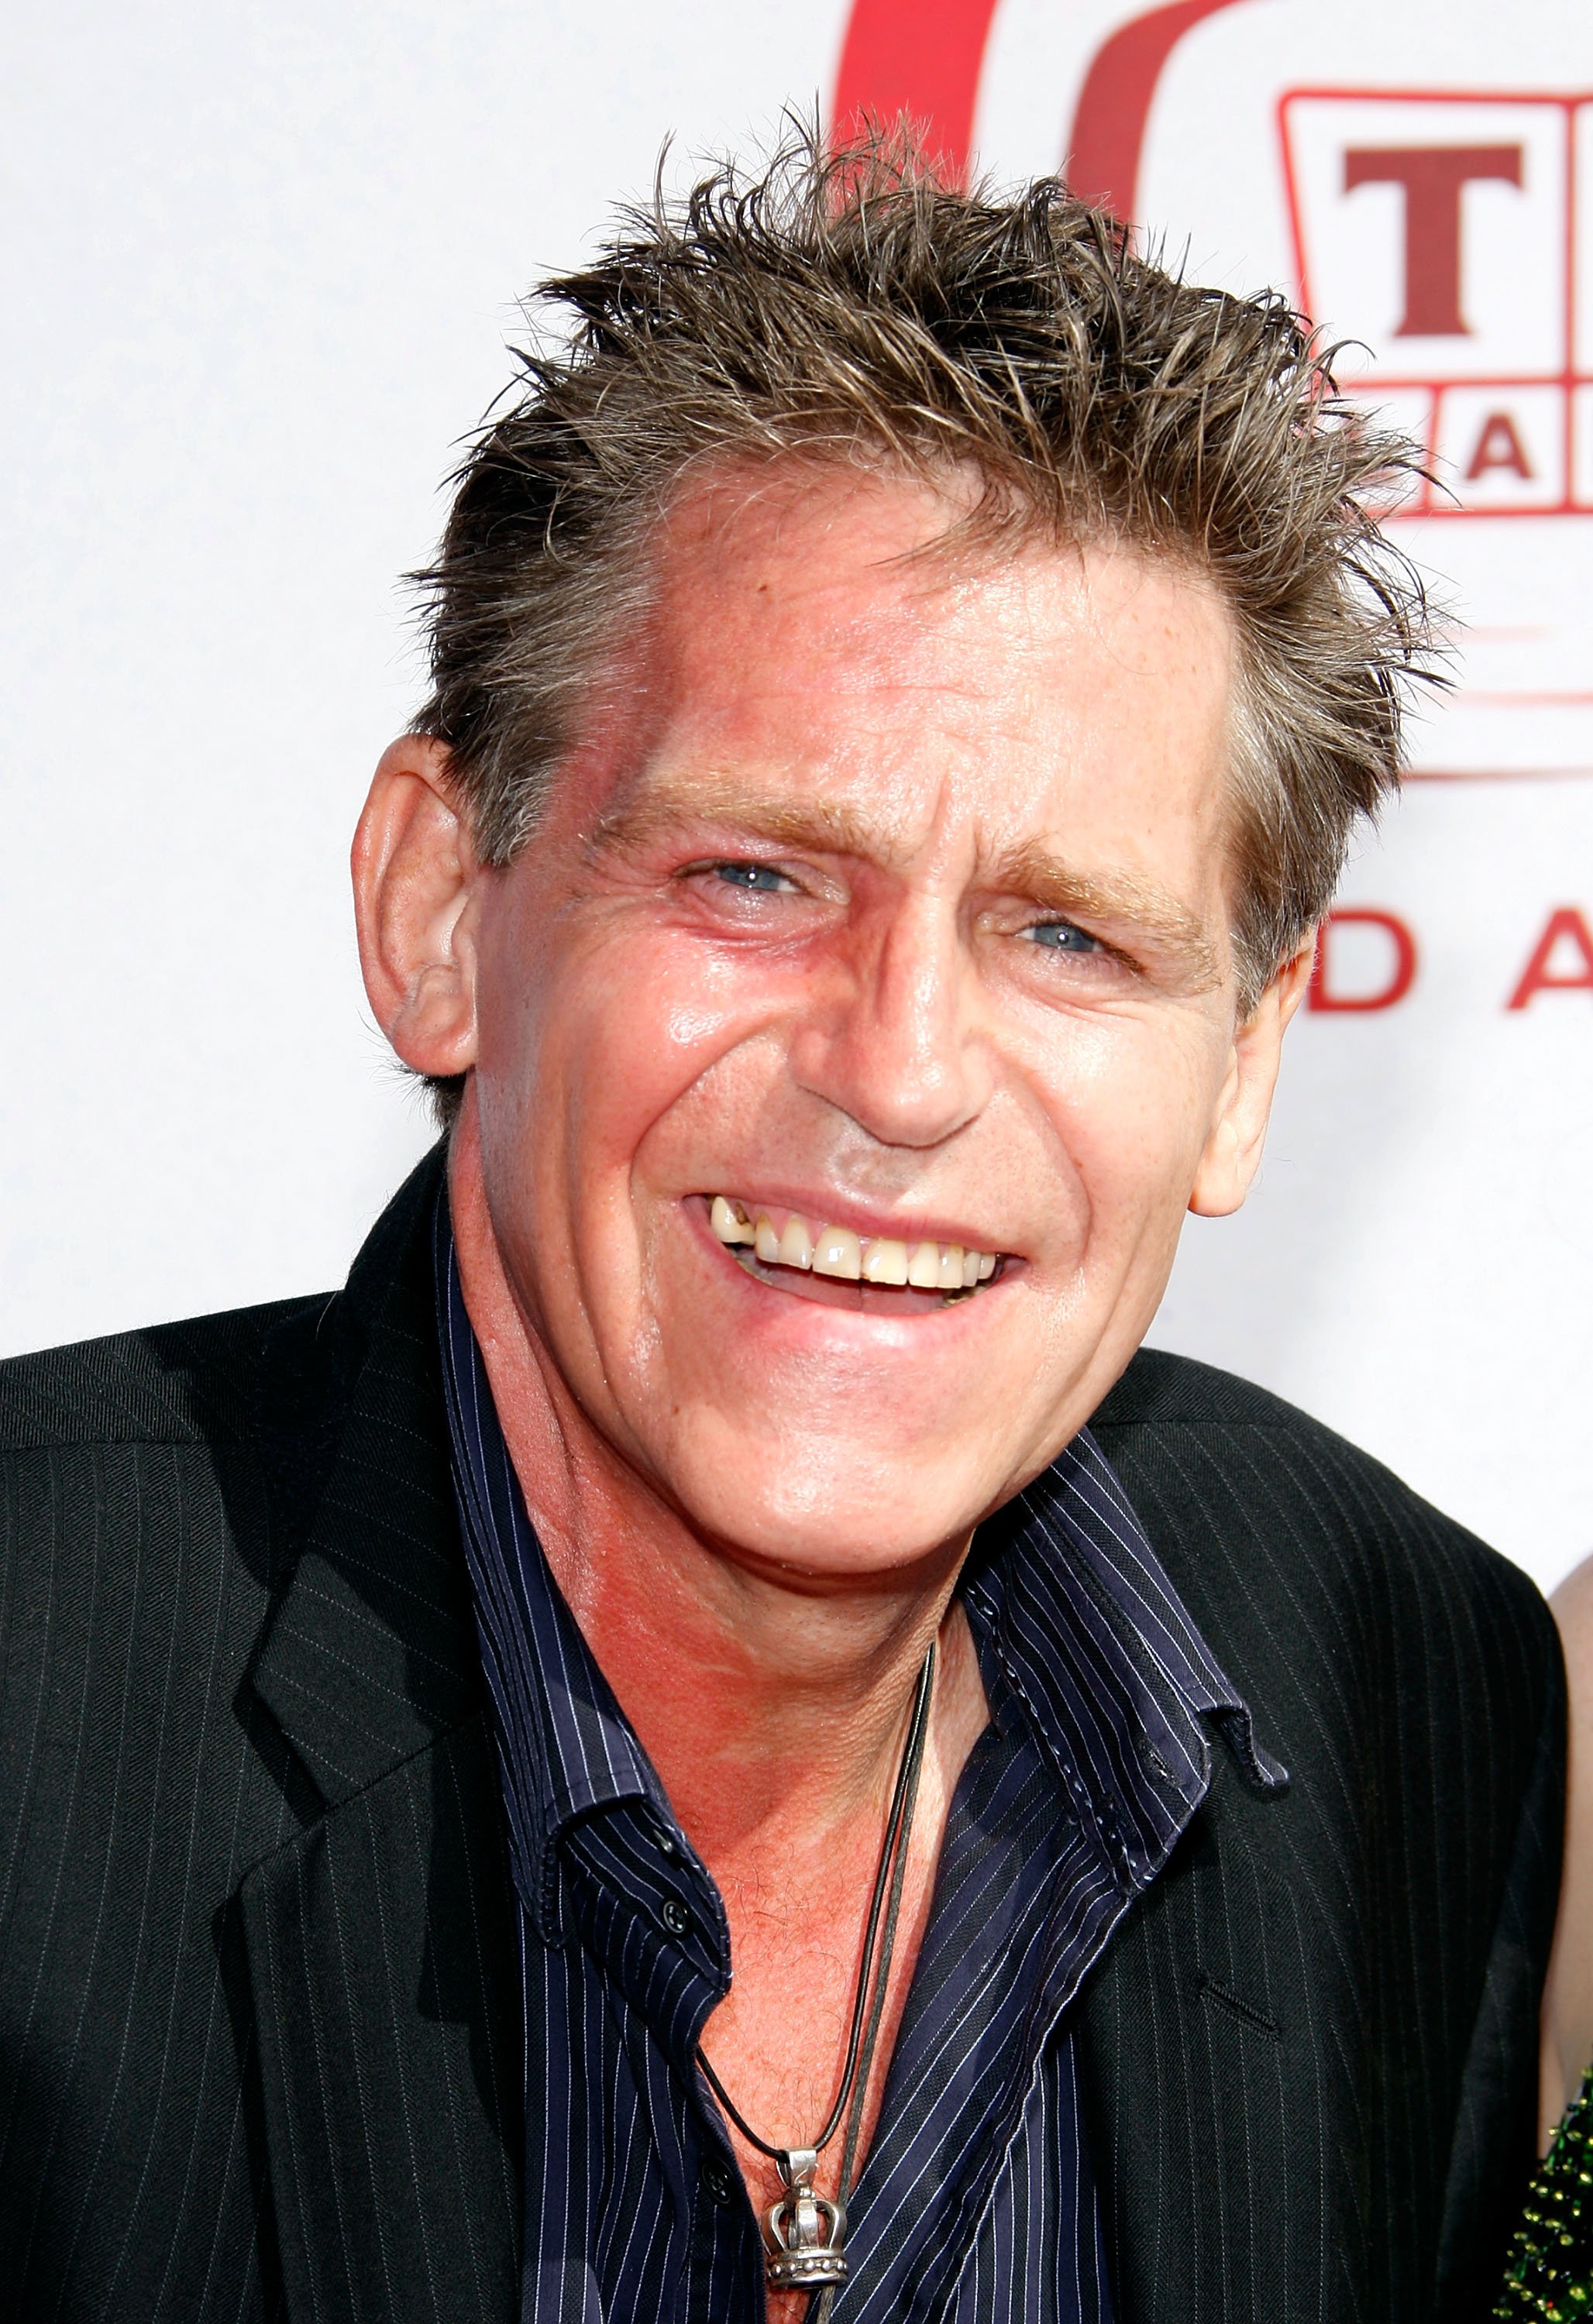 Jeff Conaway arrives at the 6th annual "TV Land Awards" held at Barker Hanger on June 8, 2008 in Santa Monica, California | Photo: Getty Images